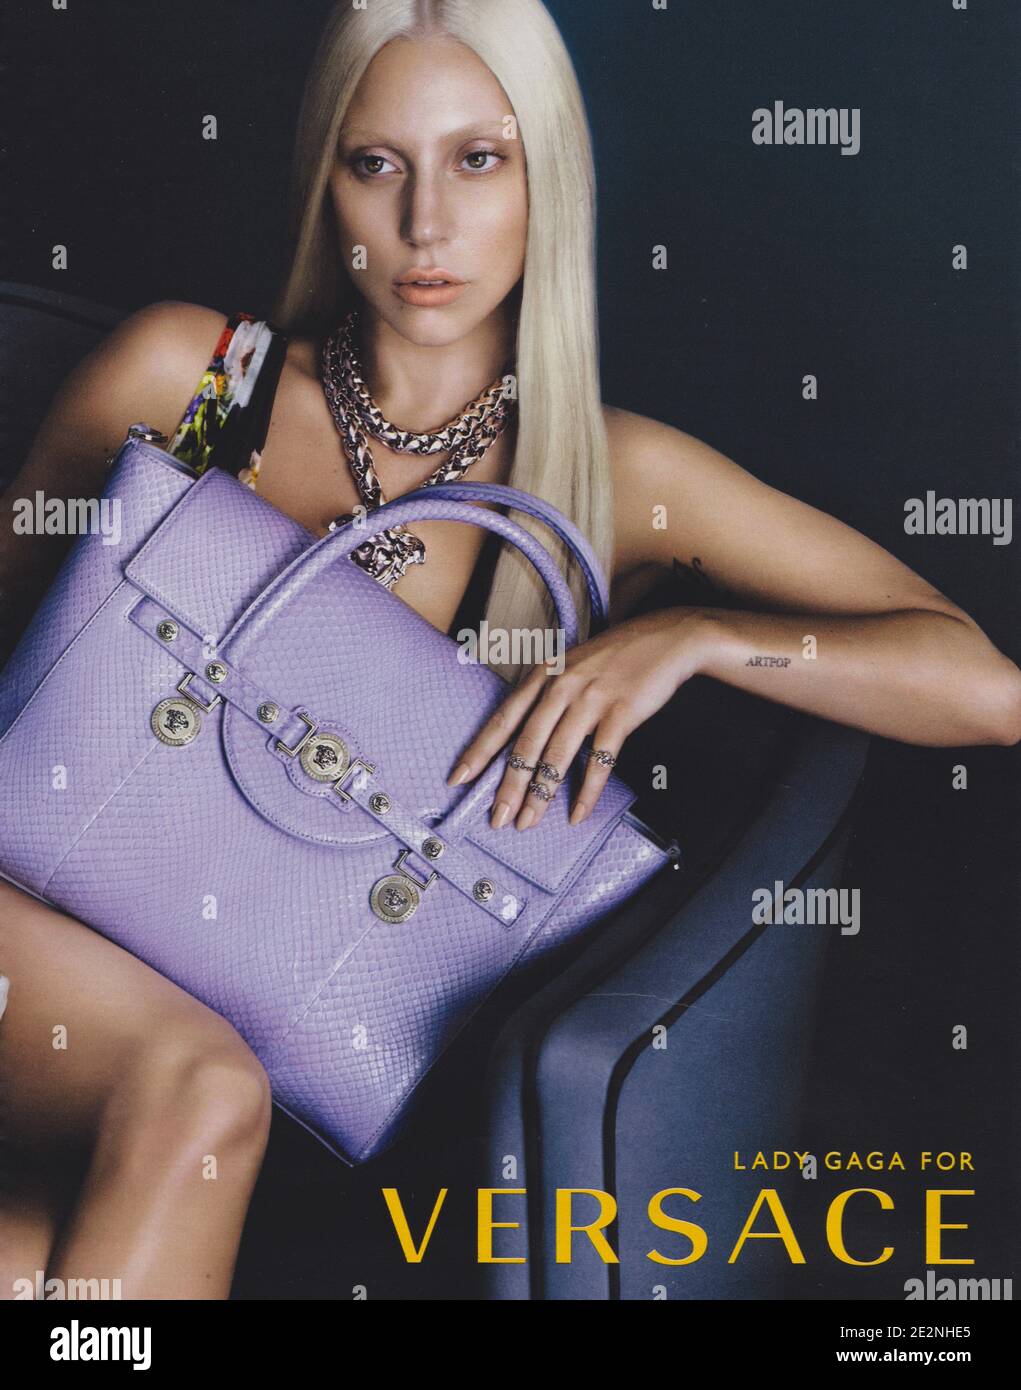 poster advertising VERSACE fashion house with Lady Gaga in paper magazine  from 2014 year, advertisement, creative VERSACE advert from 2010s Stock  Photo - Alamy